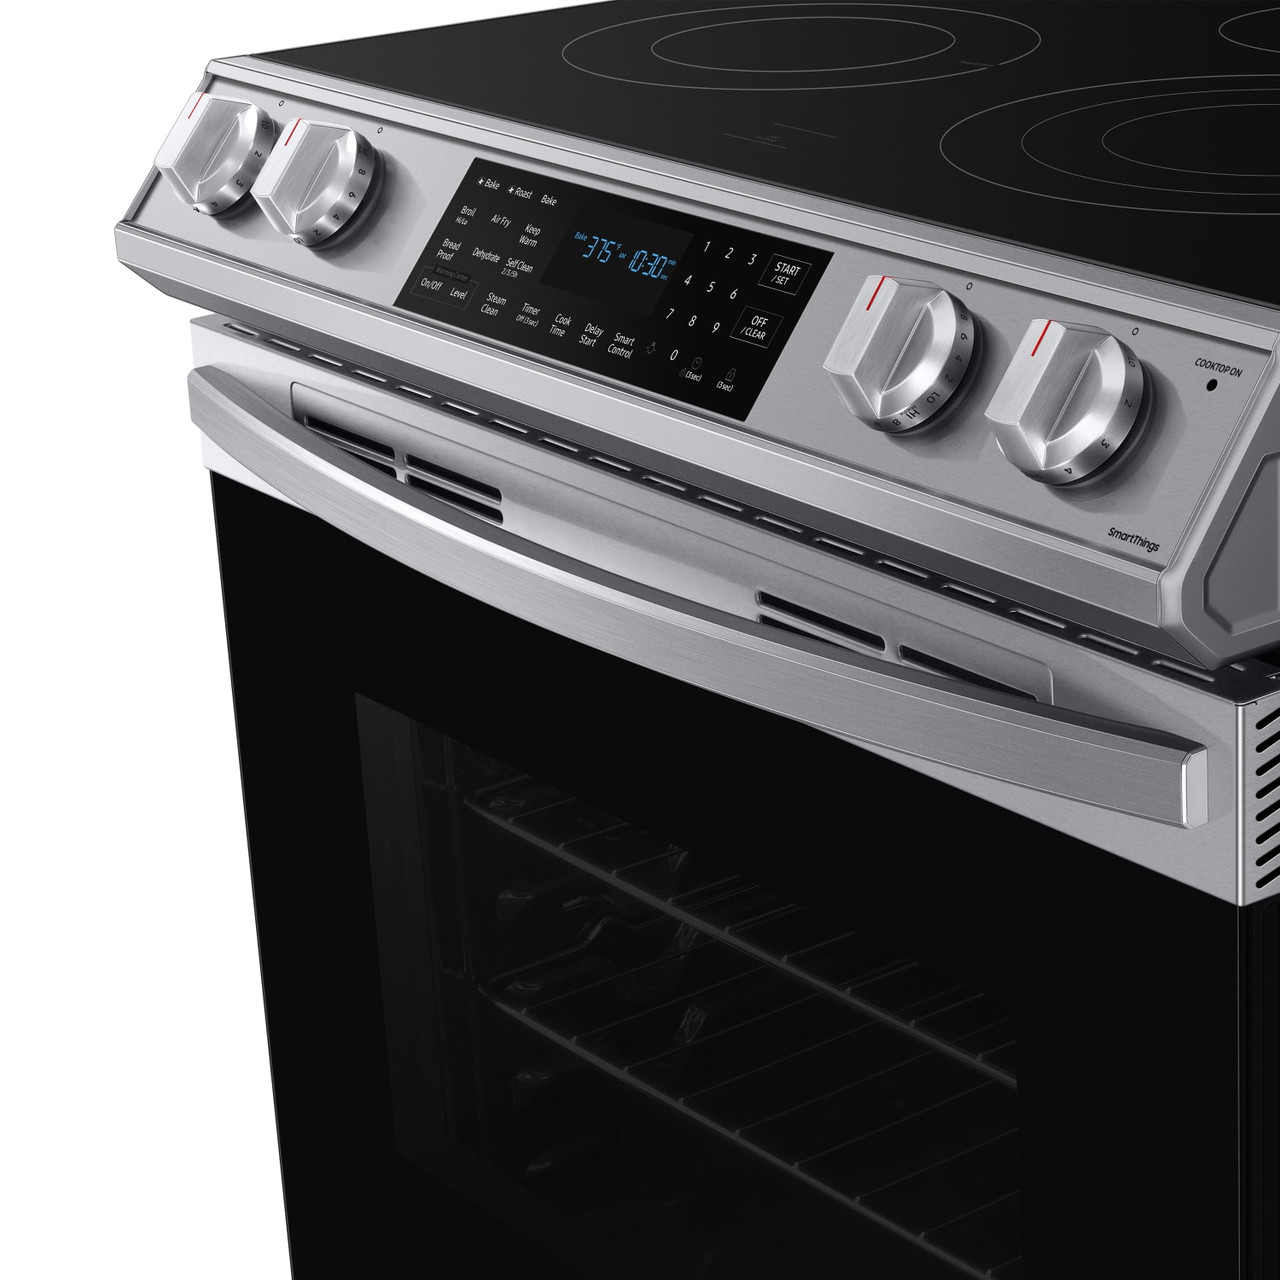 Samsung 6.3 cu. ft. Front Control Slide-in Electric Range with Air Fry & Wi-Fi - NE63T8511SS